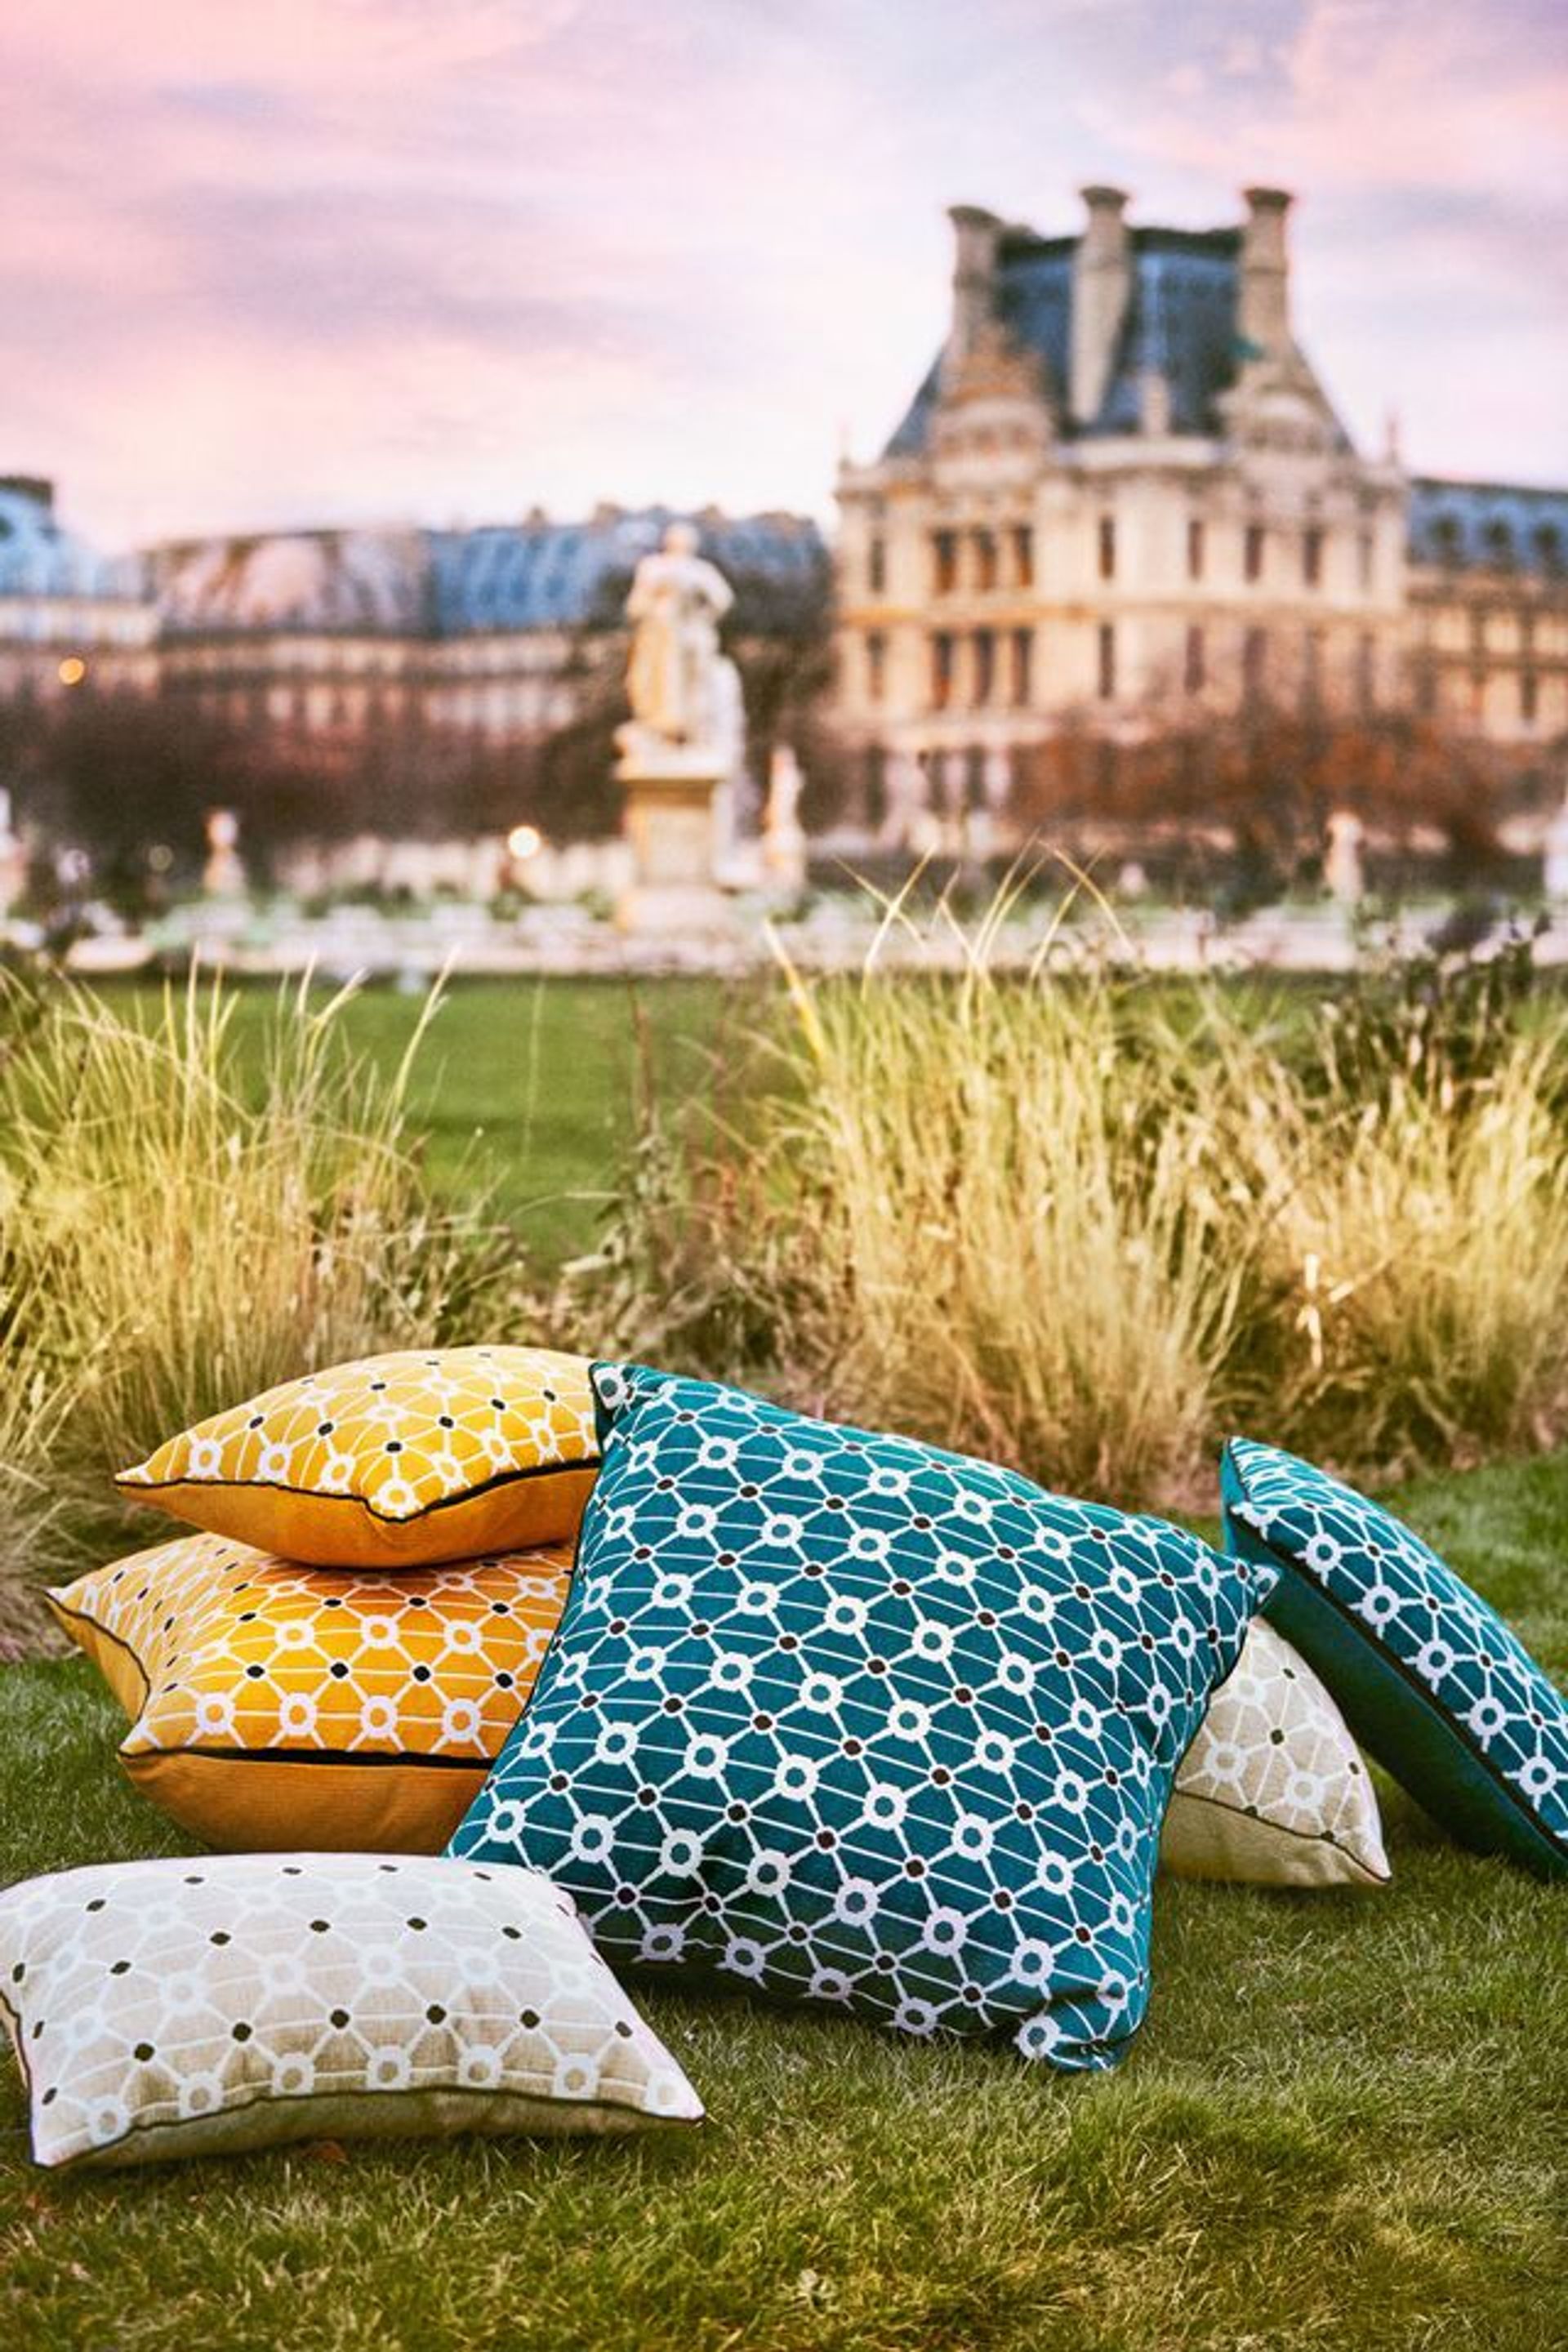 Home furnishings designed by Maison Sarah Lavoine are available to buy on the Louvre's new e-boutique, inspired by the neighbouring Tuileries Gardens in Paris Photo: © Musée du Louvre